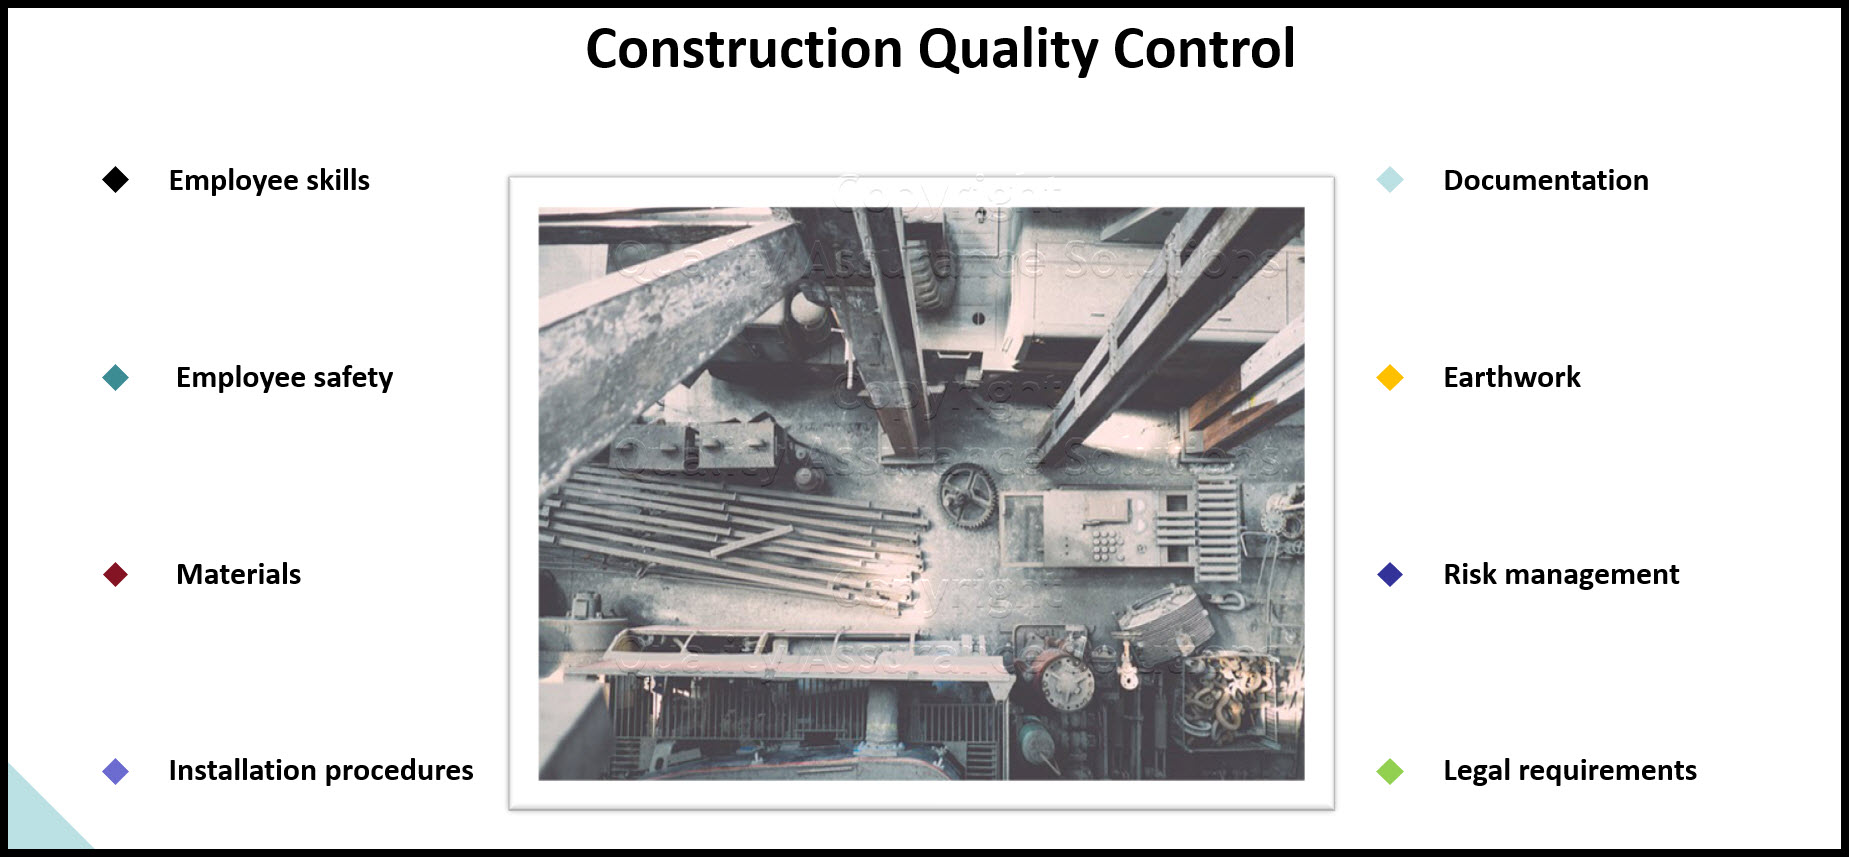 Need info on construction quality control program? Review this for contruction quality control and contruction quality assurance.